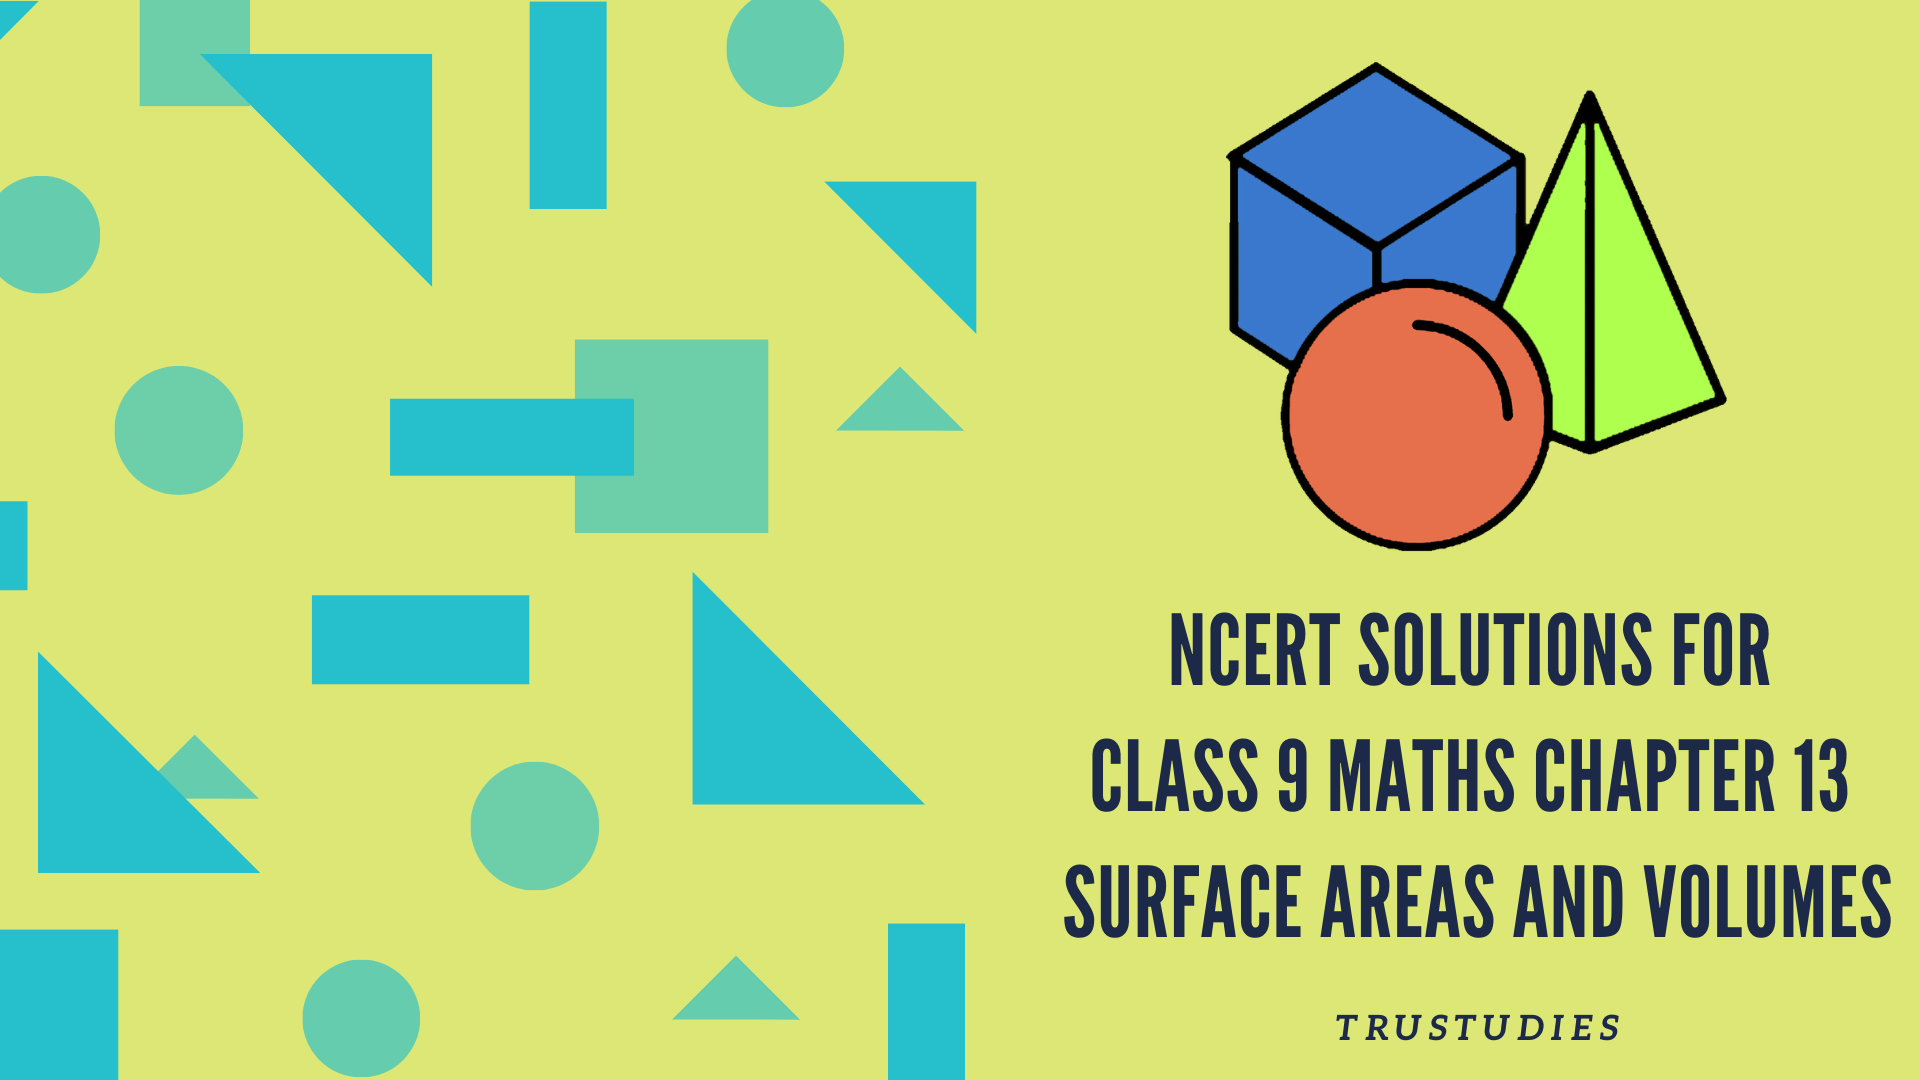 NCERT solutions for class 9 maths chapter 13 surface areas and volumes banner image